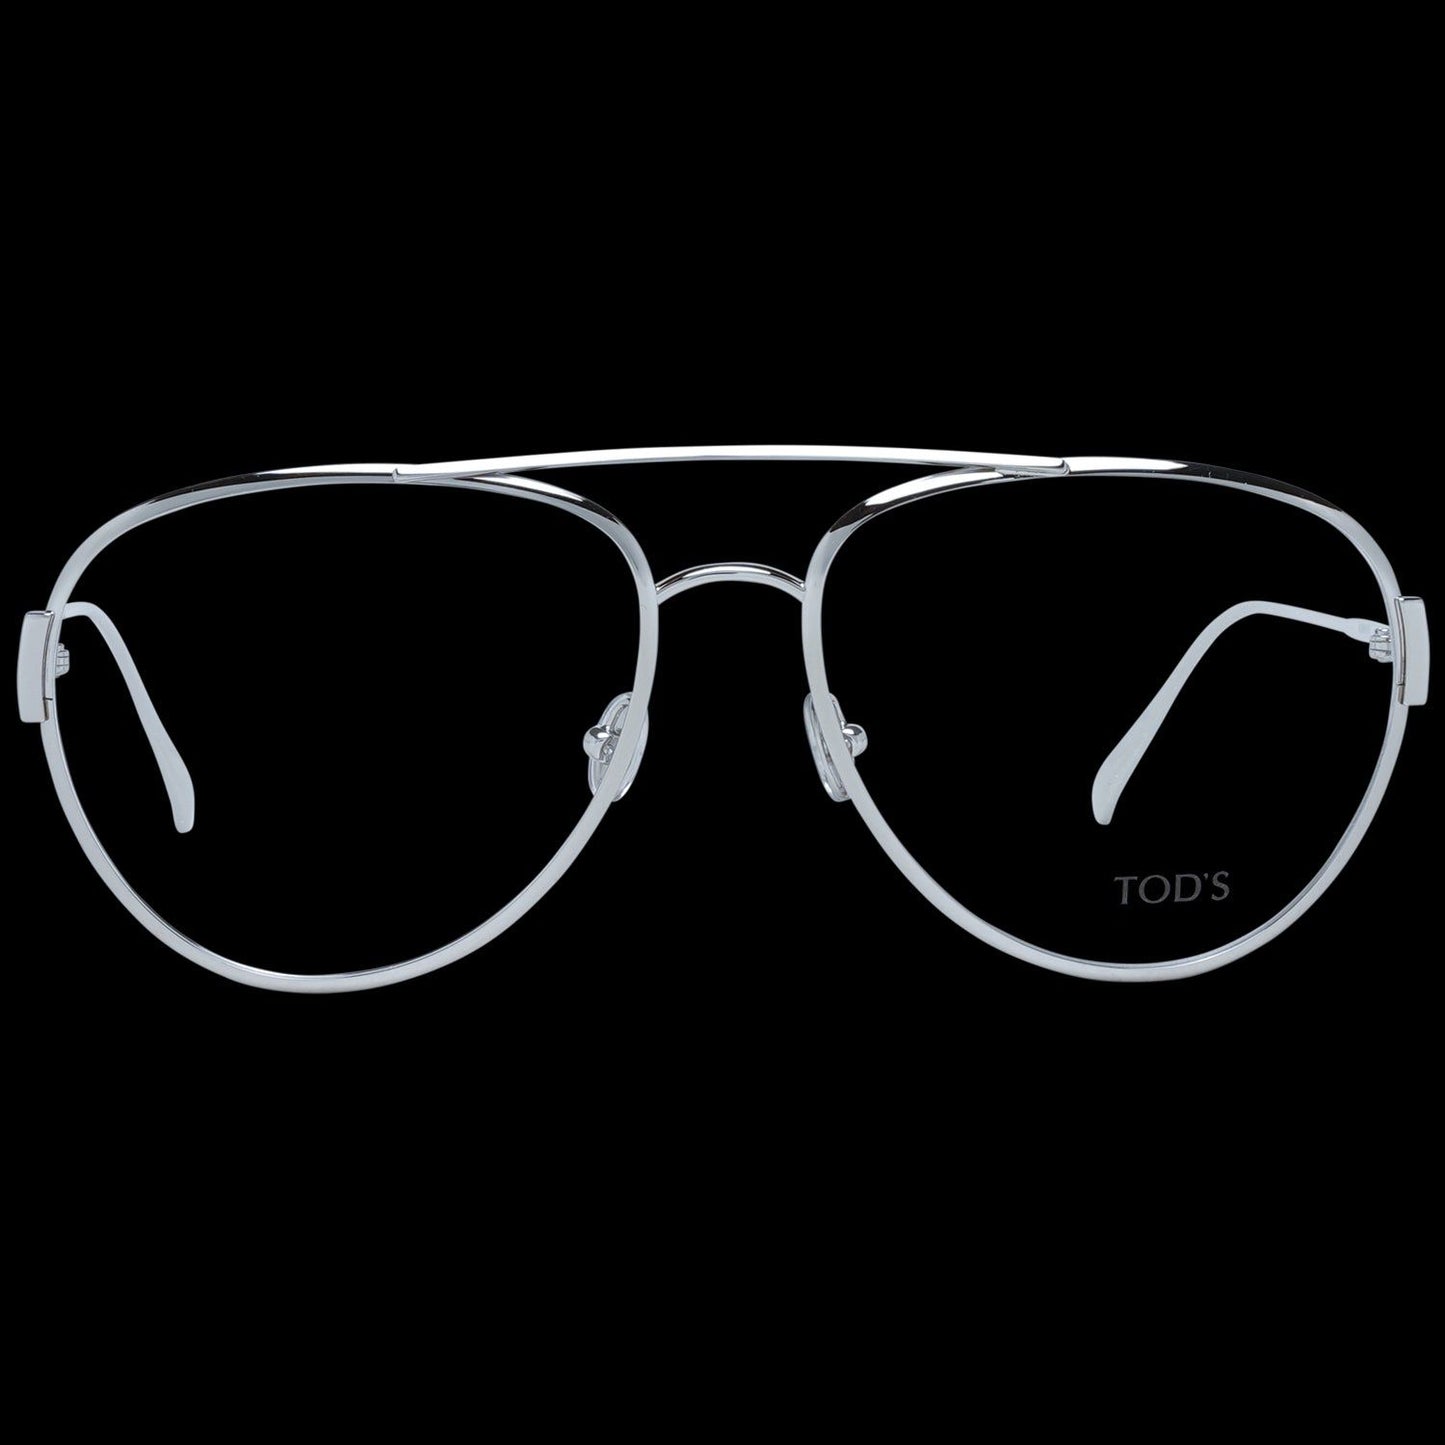 TODS FRAME TODS MOD. TO5280 56016 SUNGLASSES & EYEWEAR tods-mod-to5280-56016